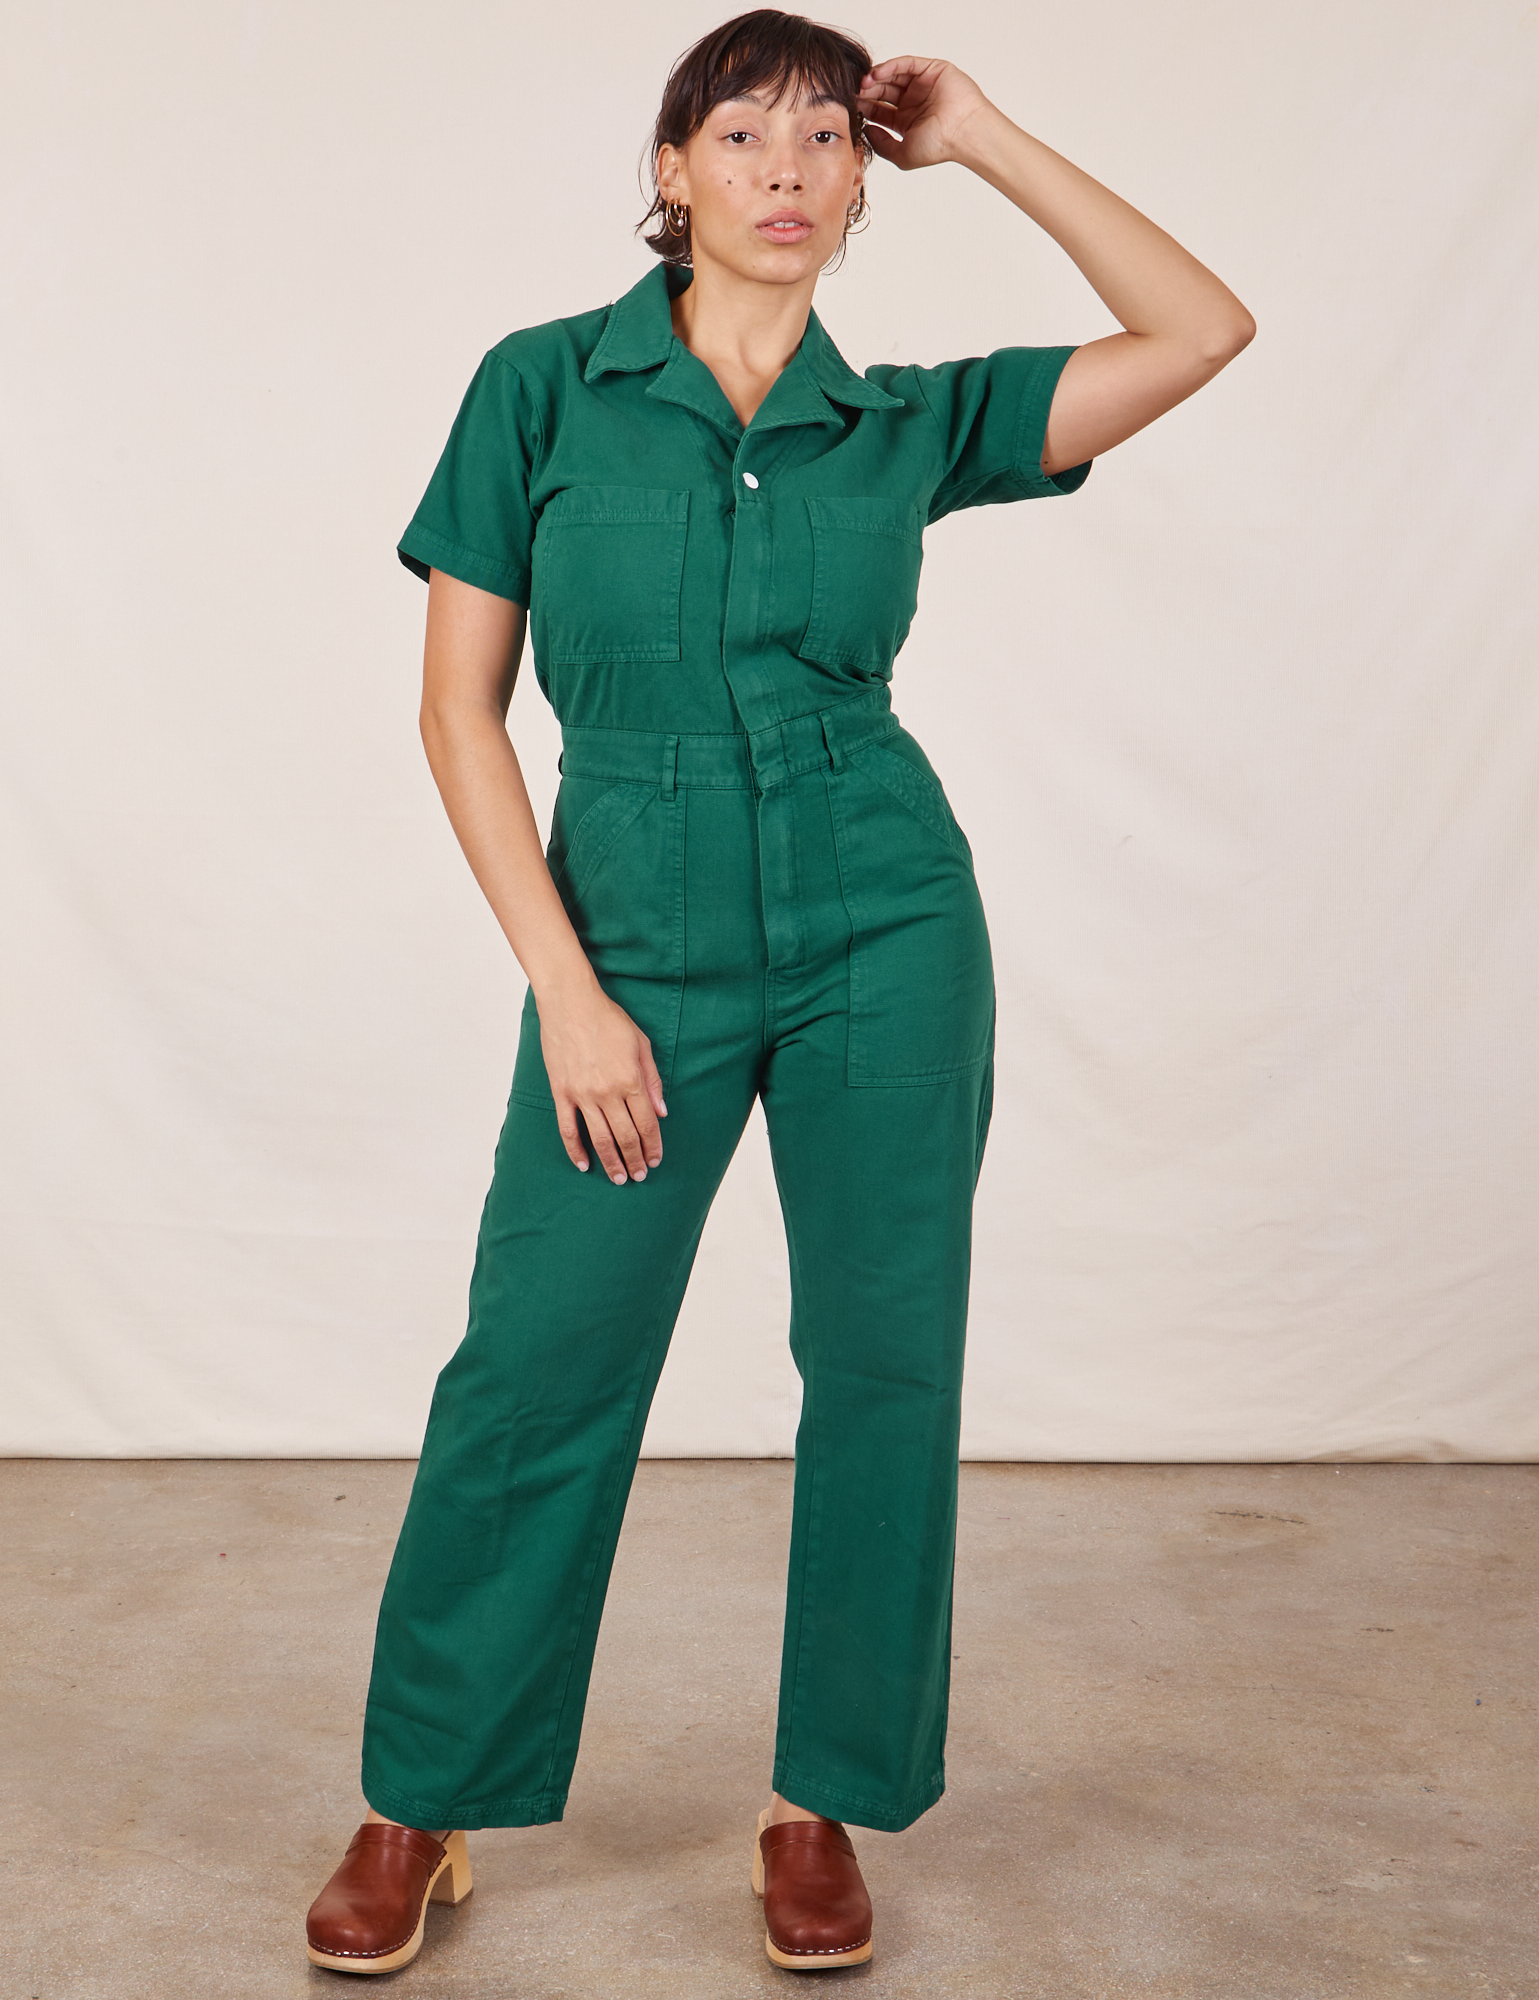 Tiara is 5&#39;4&quot; and wearing S Short Sleeve Jumpsuit in Hunter Green